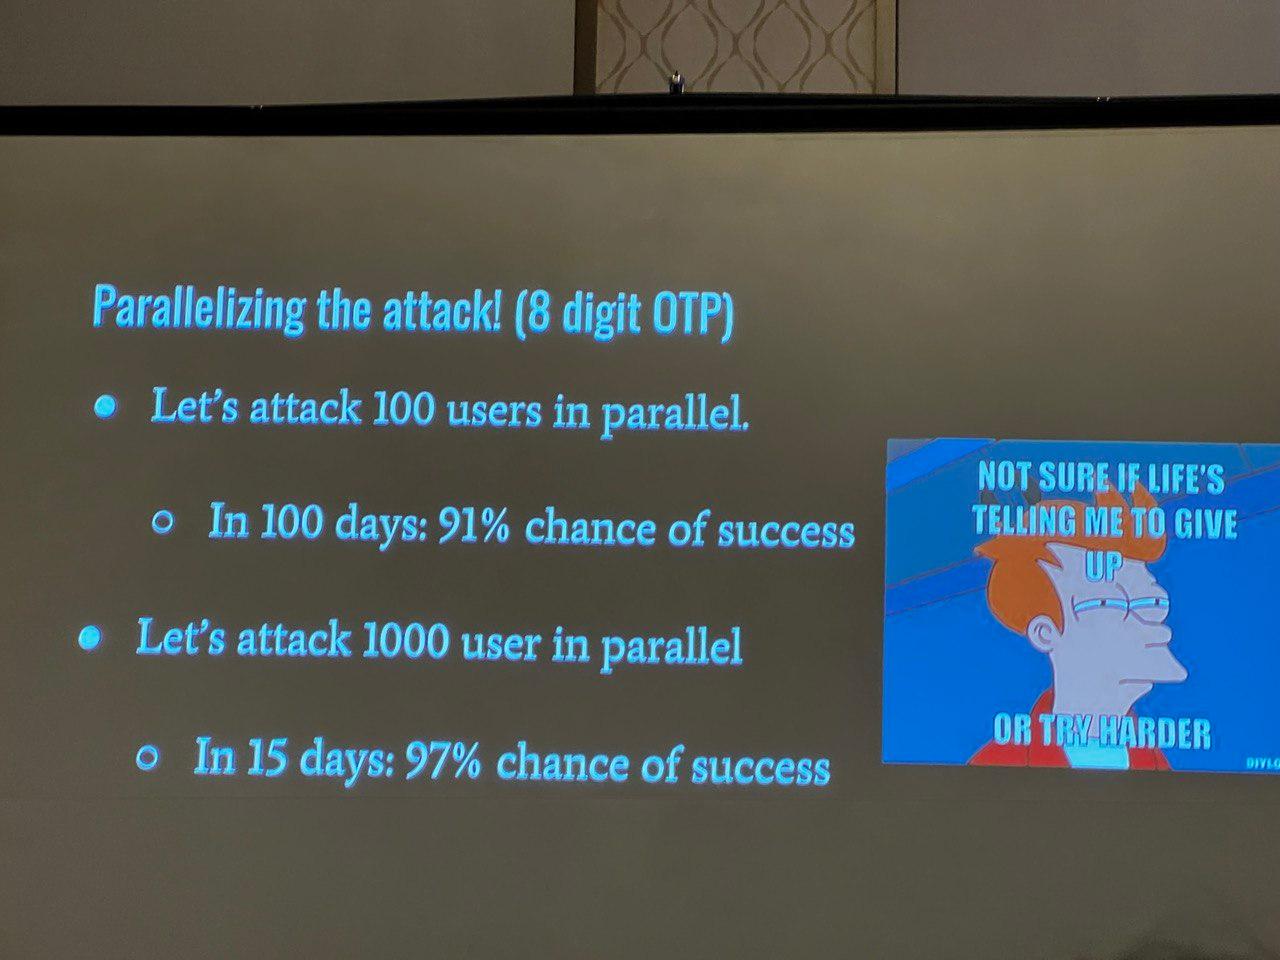 Parallelizing the attack for 8 digit O T P s. 100 users in parallel, in 100 days, 91% chance of success. 1000 users in parallel, in 15 days: 97% chance of success.